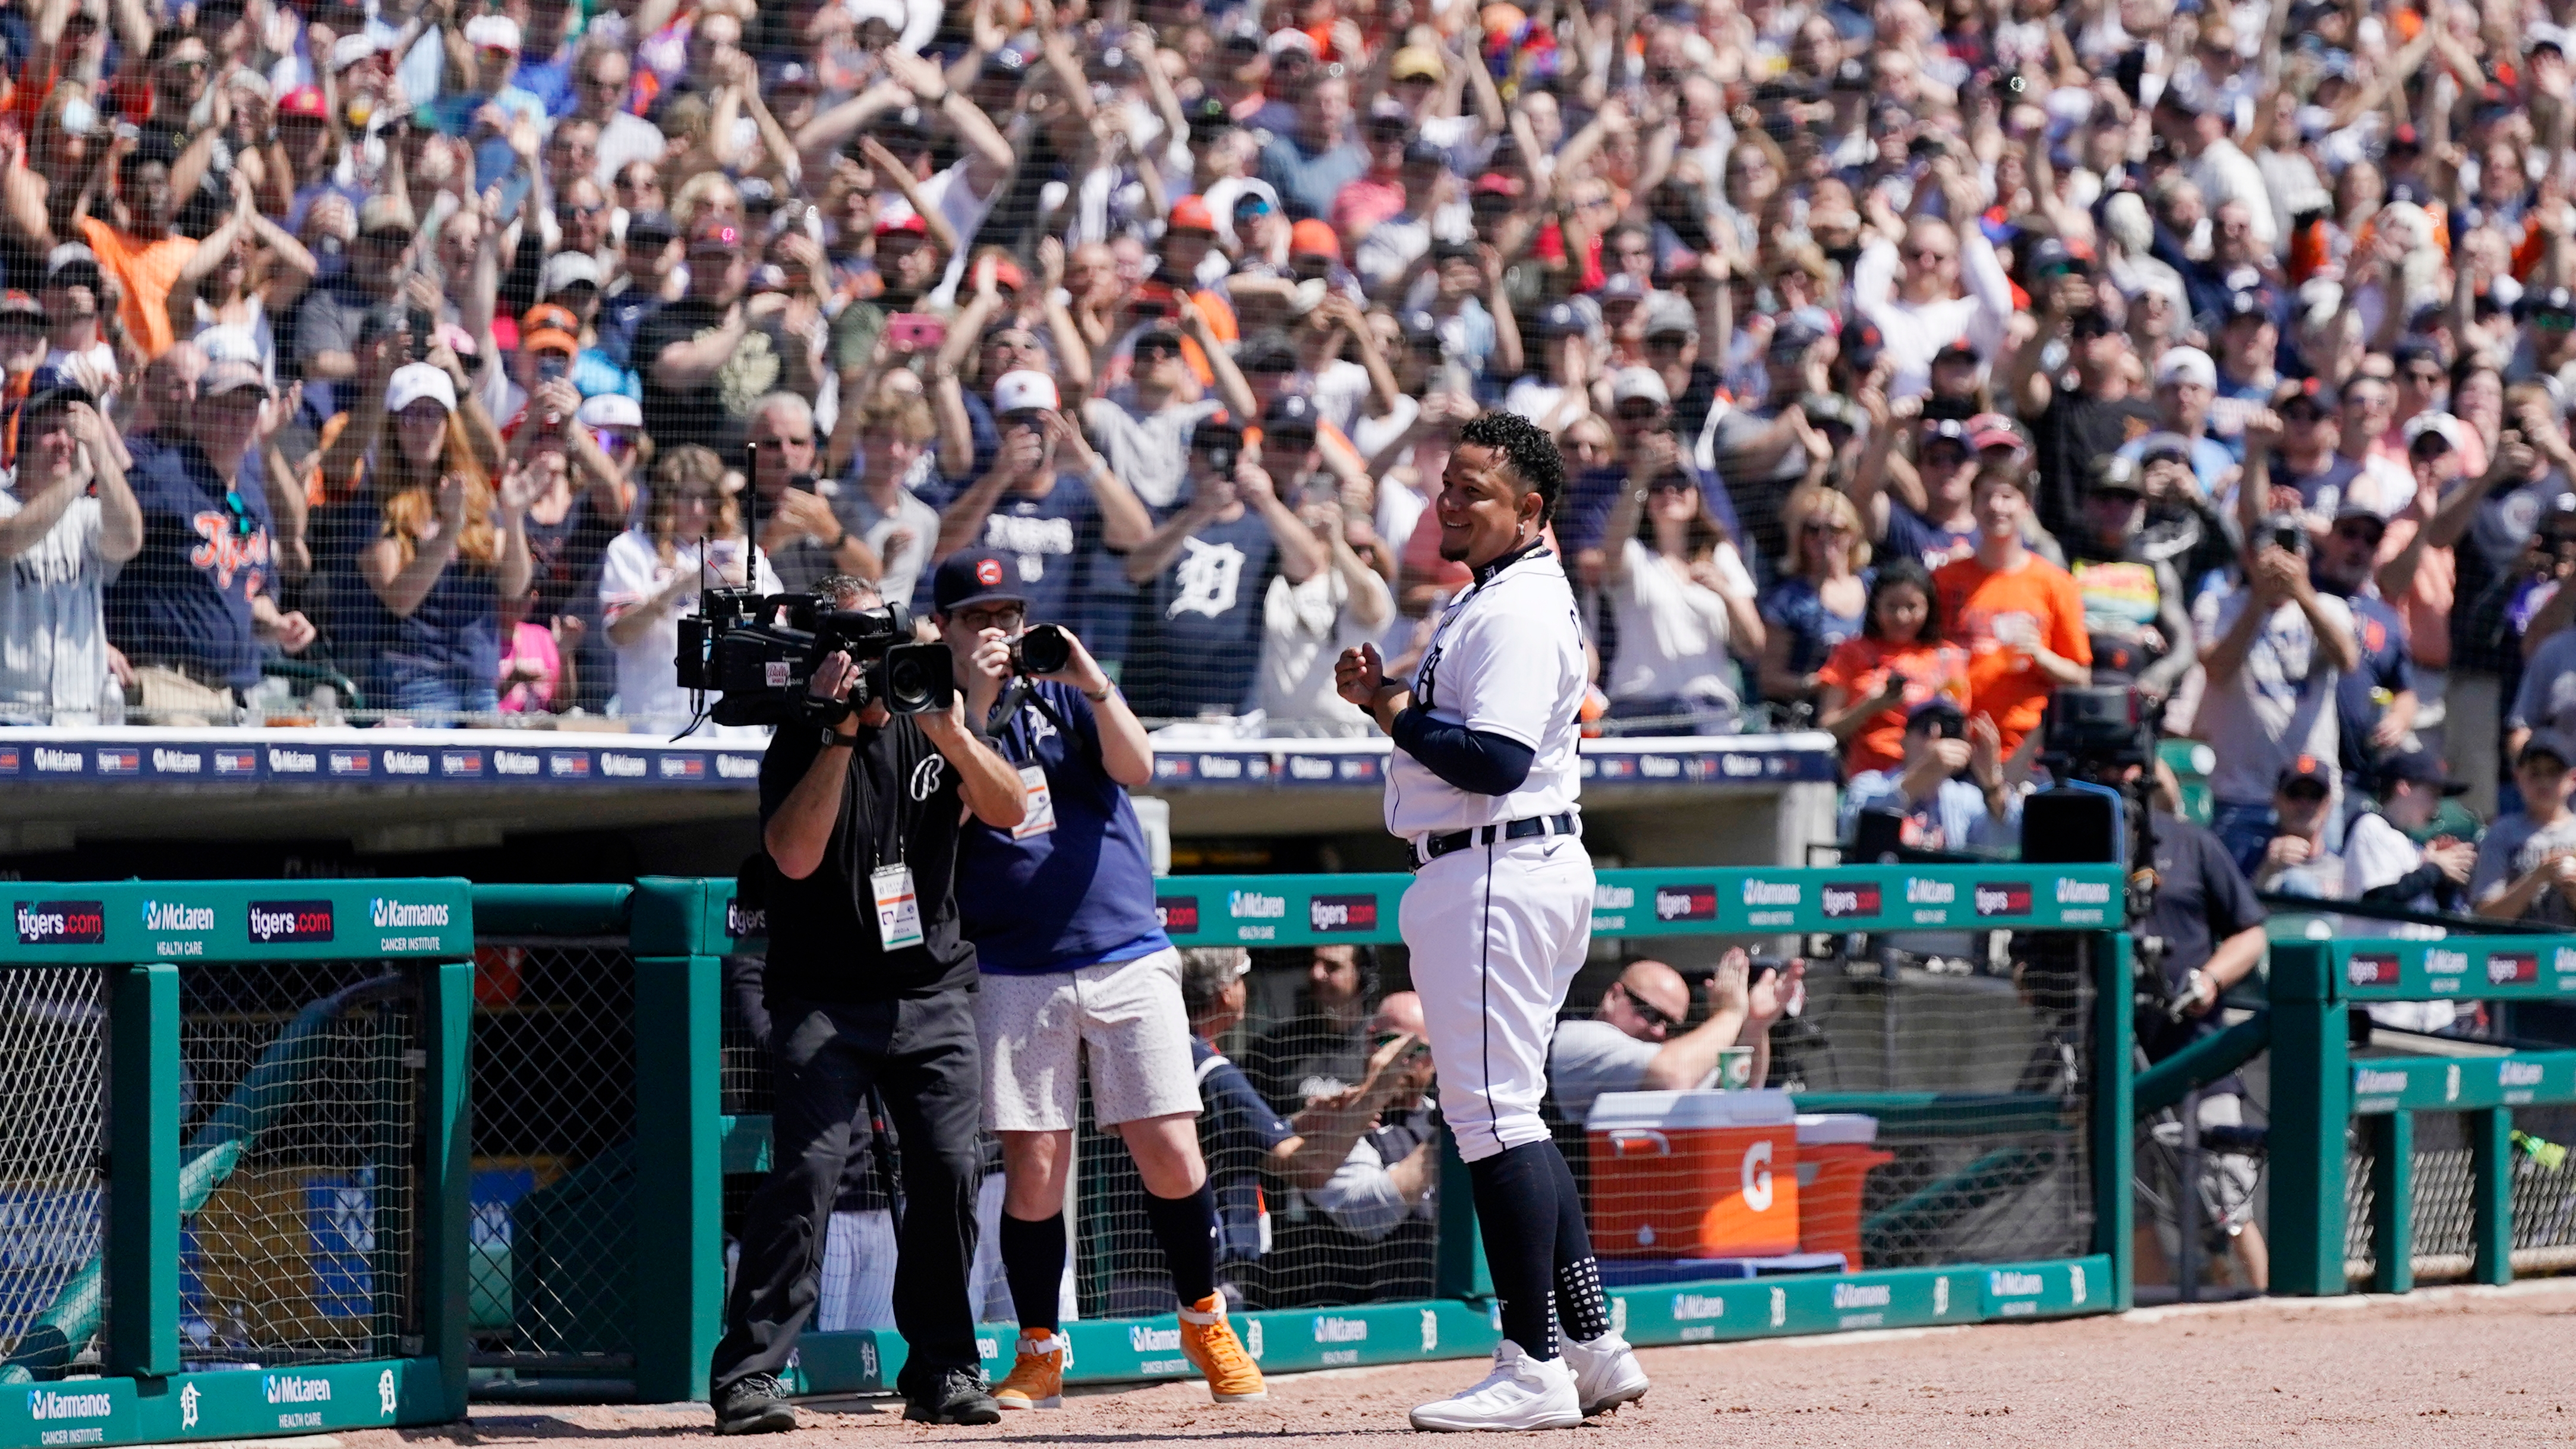 Miguel Cabrera's career coming to close with Tigers